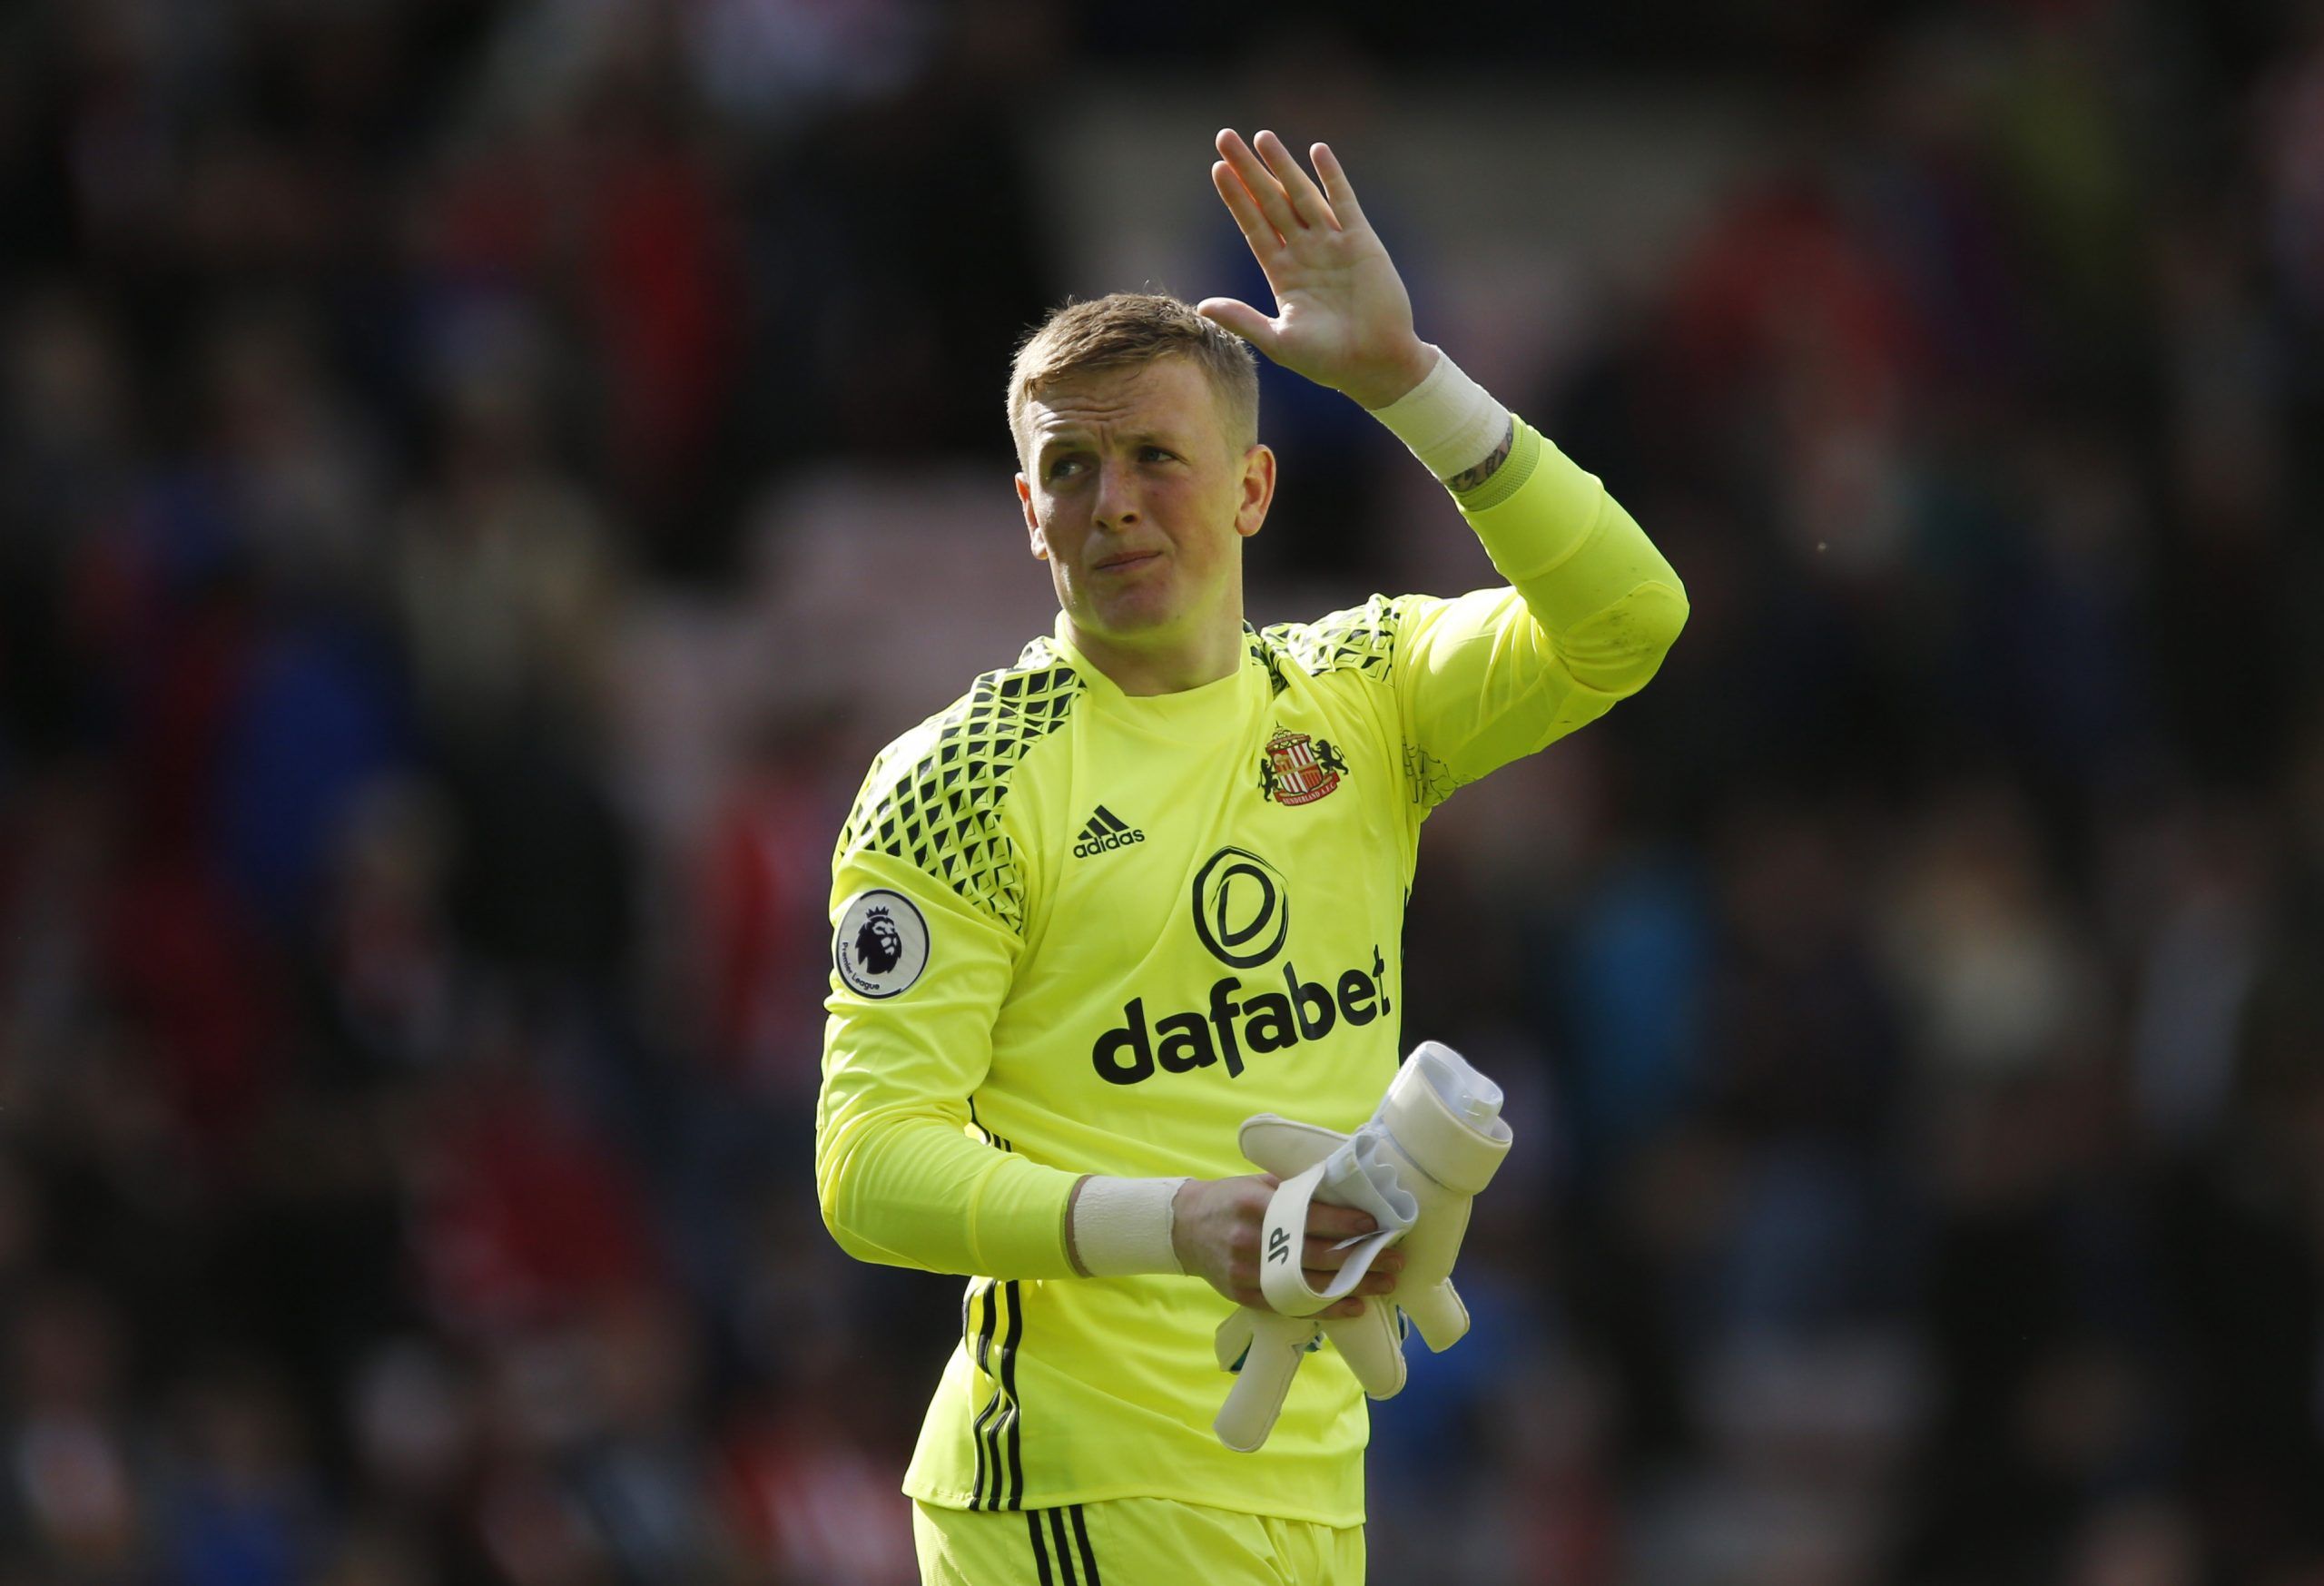 Britain Football Soccer - Sunderland v Swansea City - Premier League - Stadium of Light - 13/5/17 Sunderland's Jordan Pickford acknowledges fans after the game Action Images via Reuters / Andrew Boyers Livepic EDITORIAL USE ONLY. No use with unauthorized audio, video, data, fixture lists, club/league logos or 